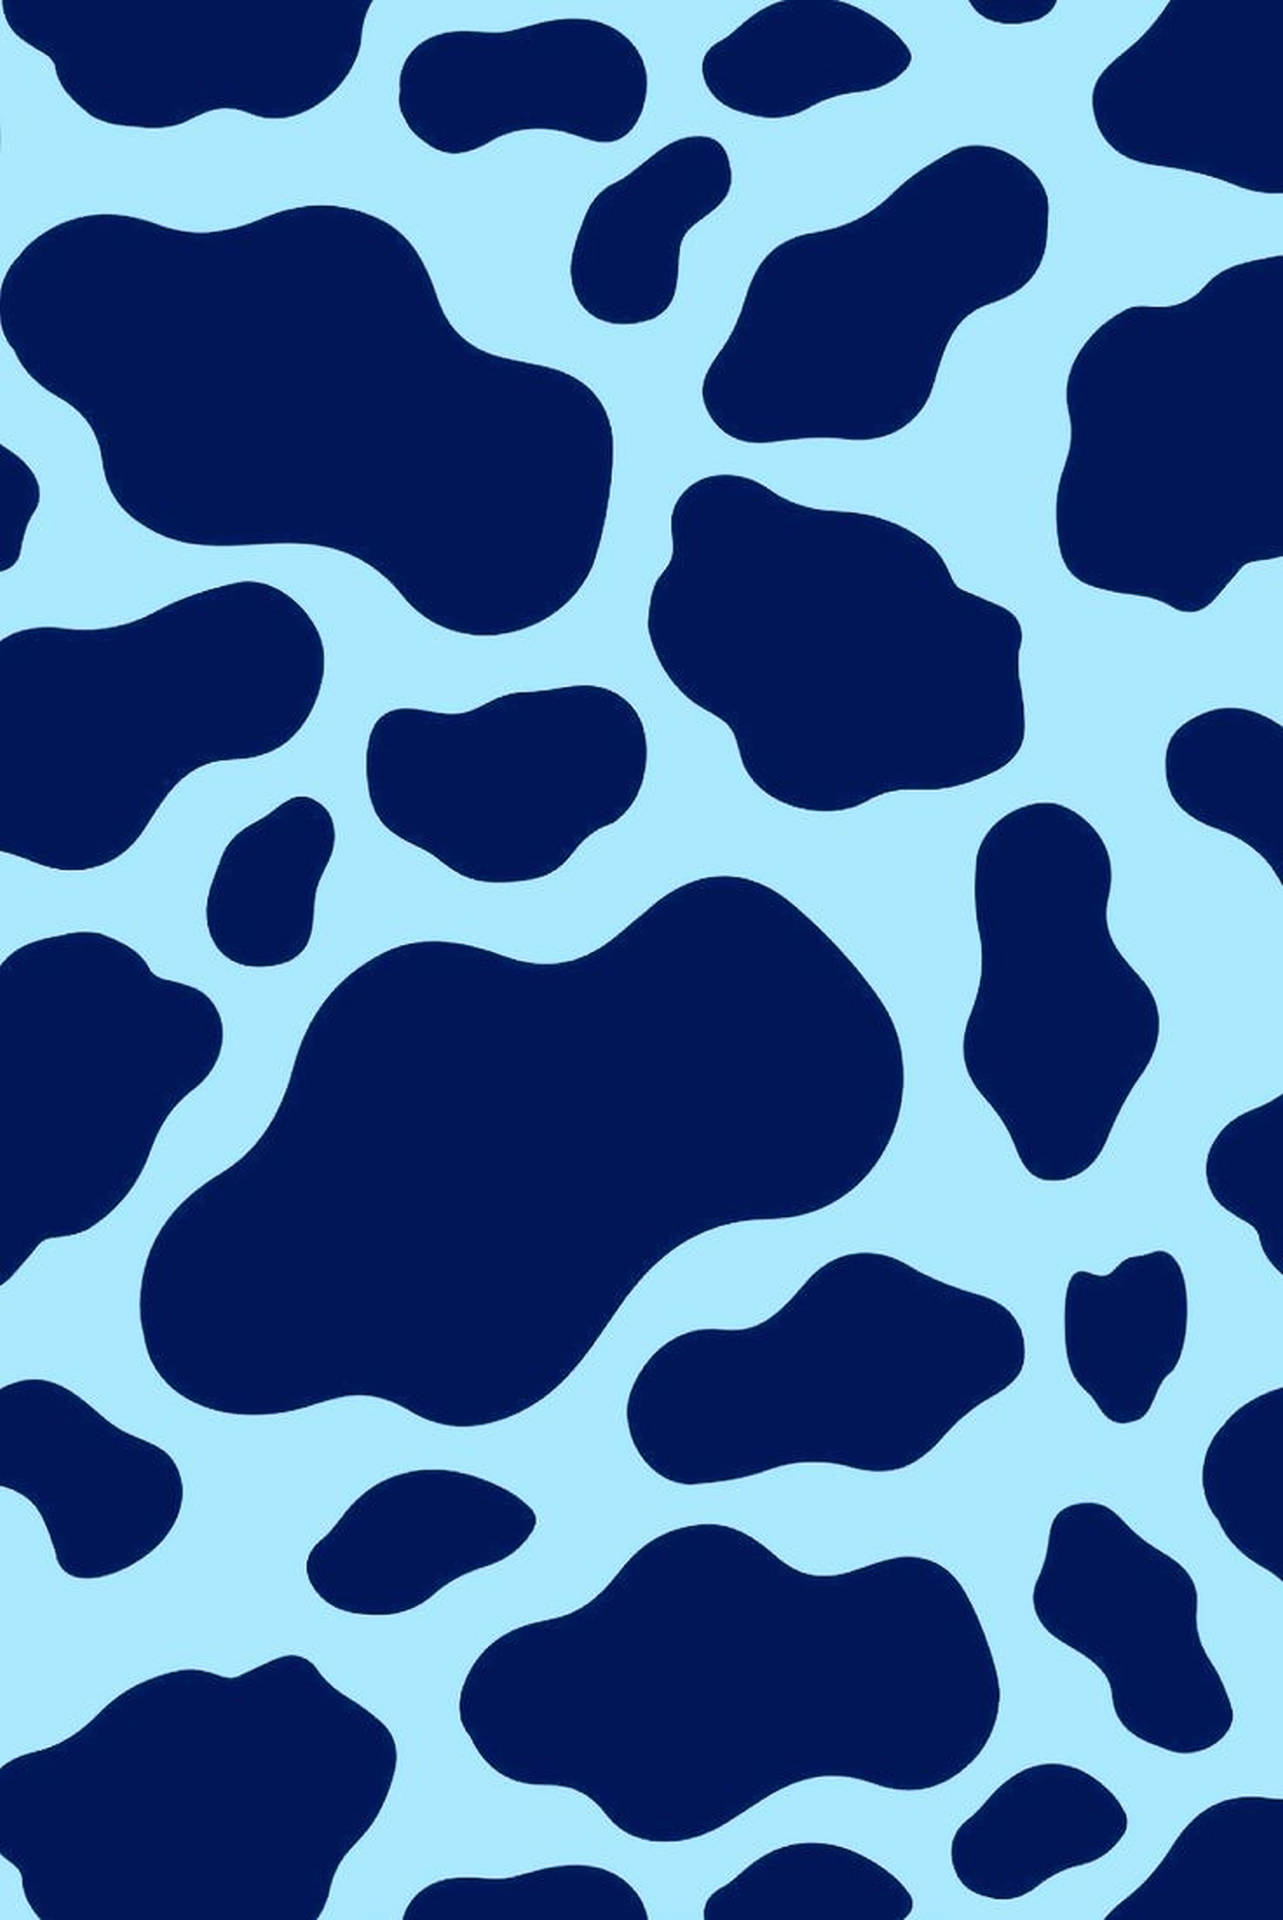 Unconventional Artistry: Blue Shade Cow Print Background